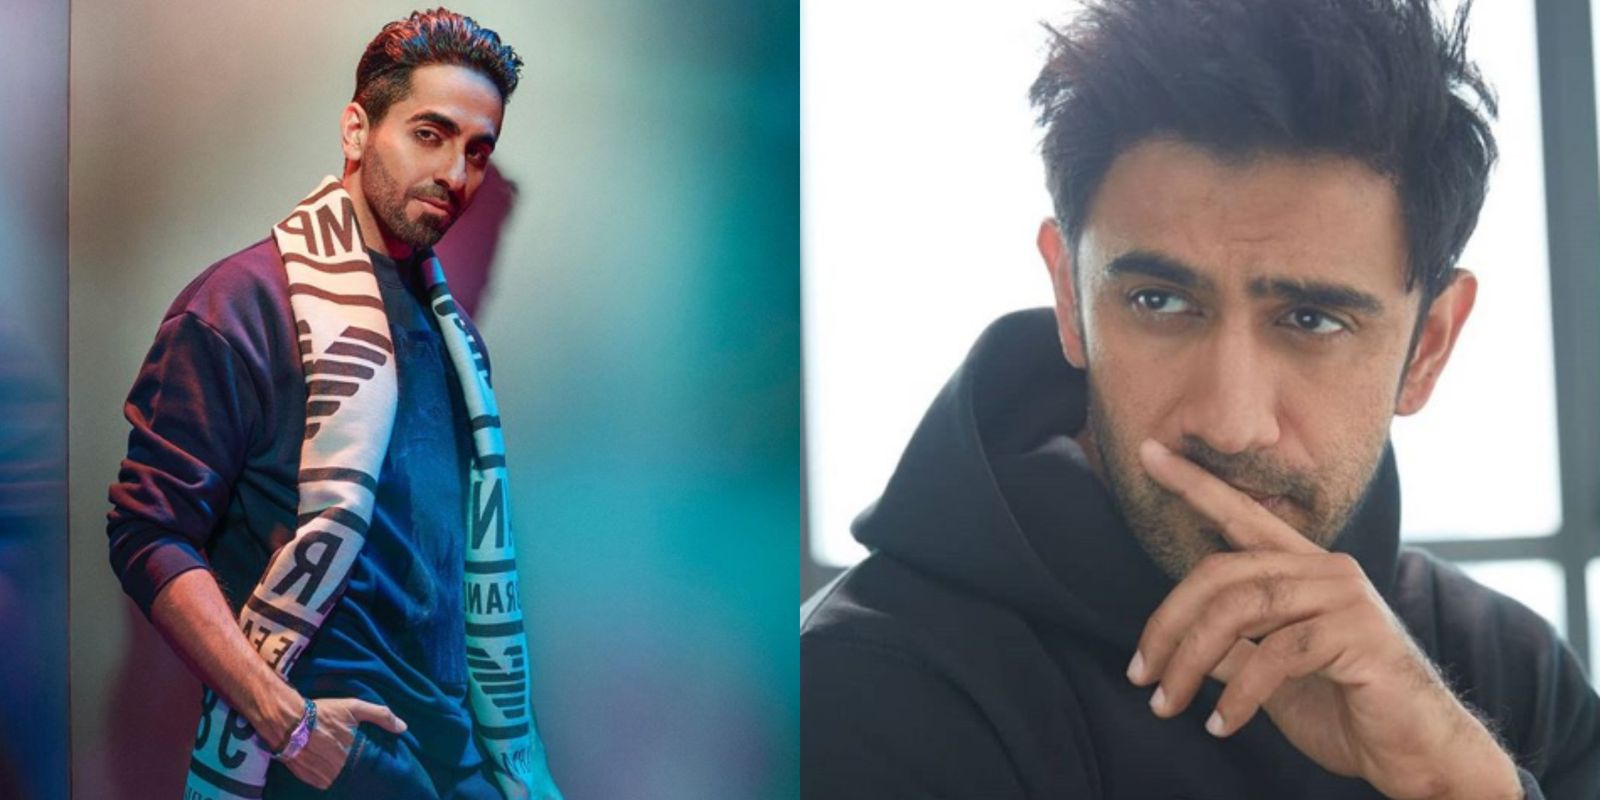 "Ayushmann Khurranna Has Been A Great Inspiration": Amit Sadh On Picking Different Subjects (Operation Parindey, Avrodh, Breathe2) In 2020 